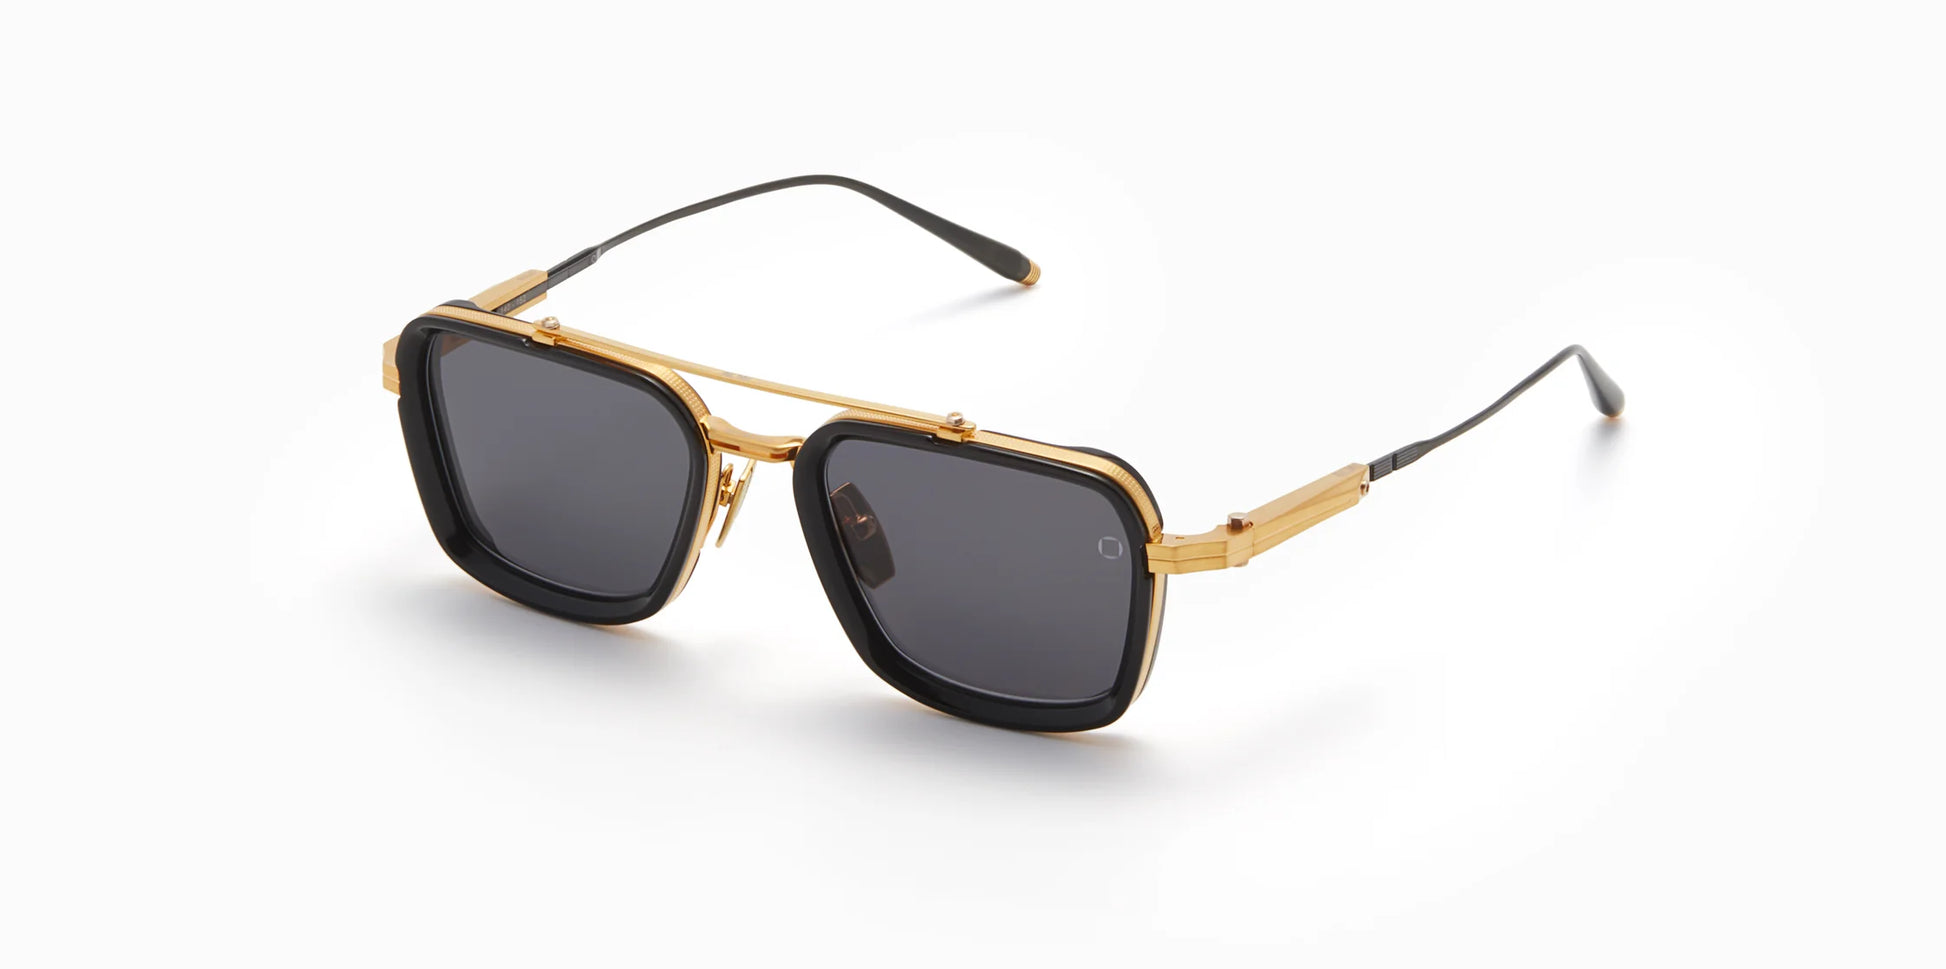 Three-quarter view of Akoni's new "Solis" frame in the black and gold colorway, a squared-off navigator silhouette with adjustable temples and a sculpted Japanese Acetate front set within a striking Japanese Titanium frame.